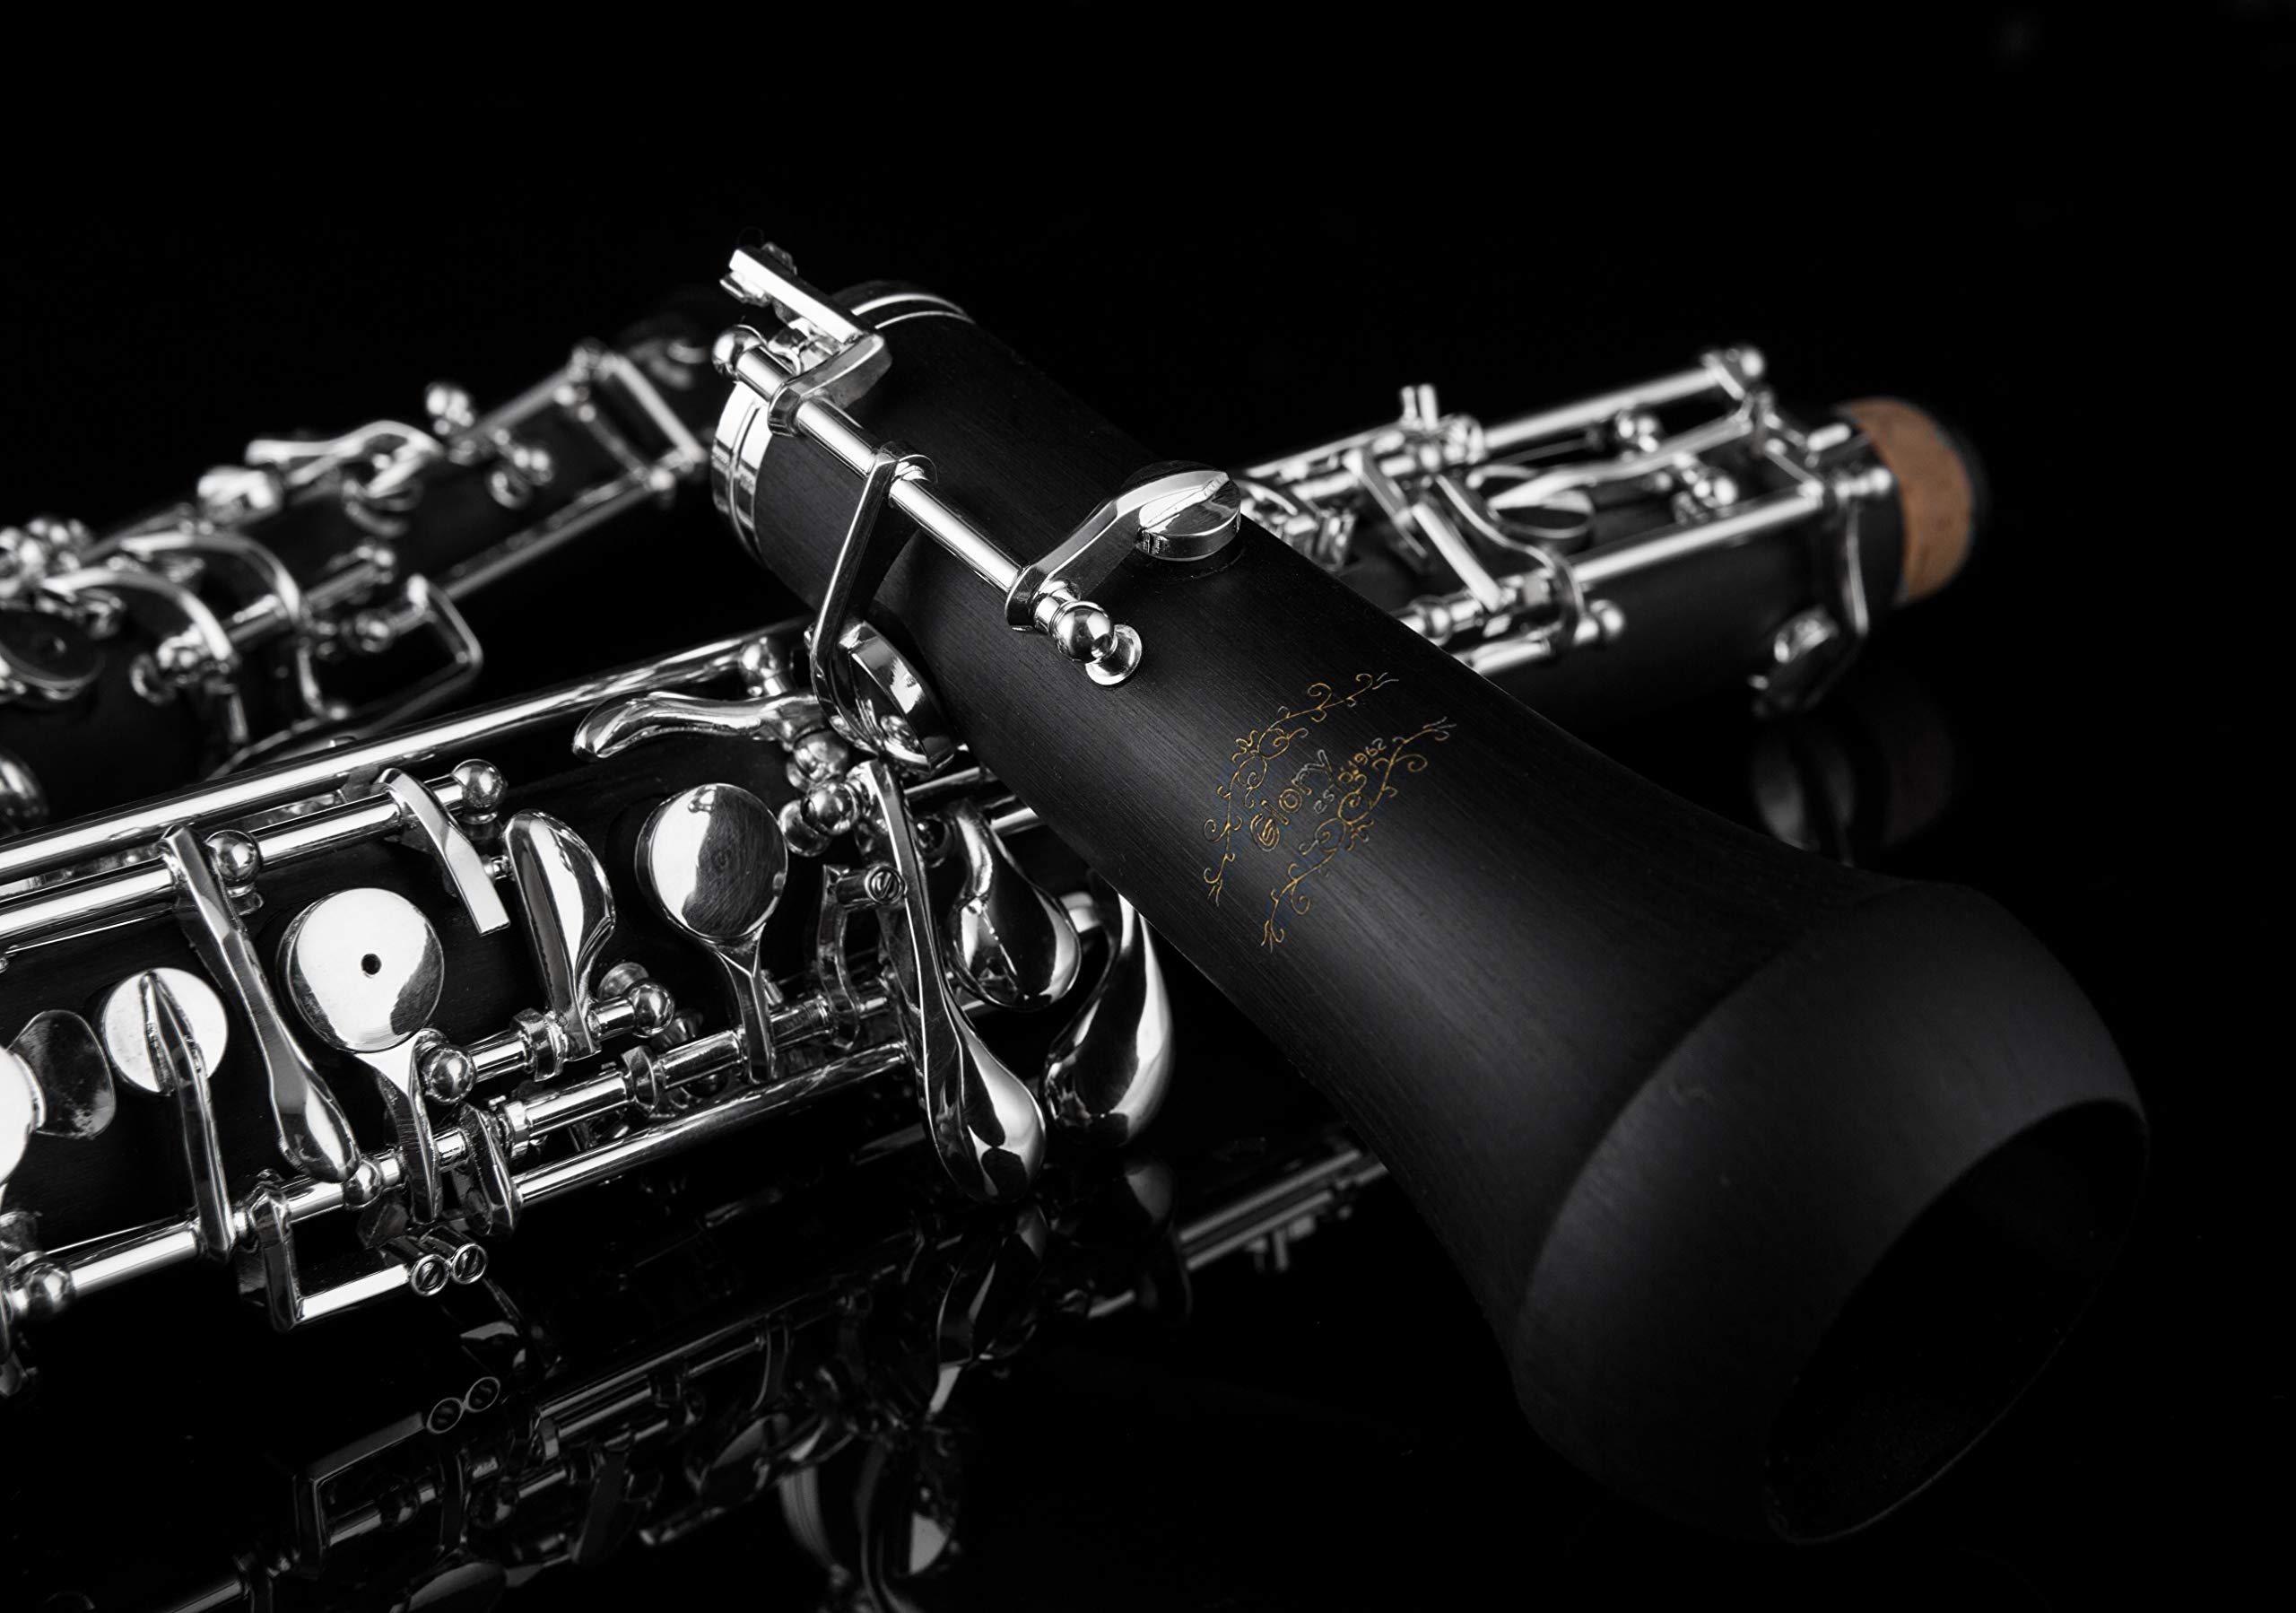 Oboe: Glory C Key Cupronickel Plated Silver, Woodwind Musical Instrument for Beginner. 2560x1800 HD Background.